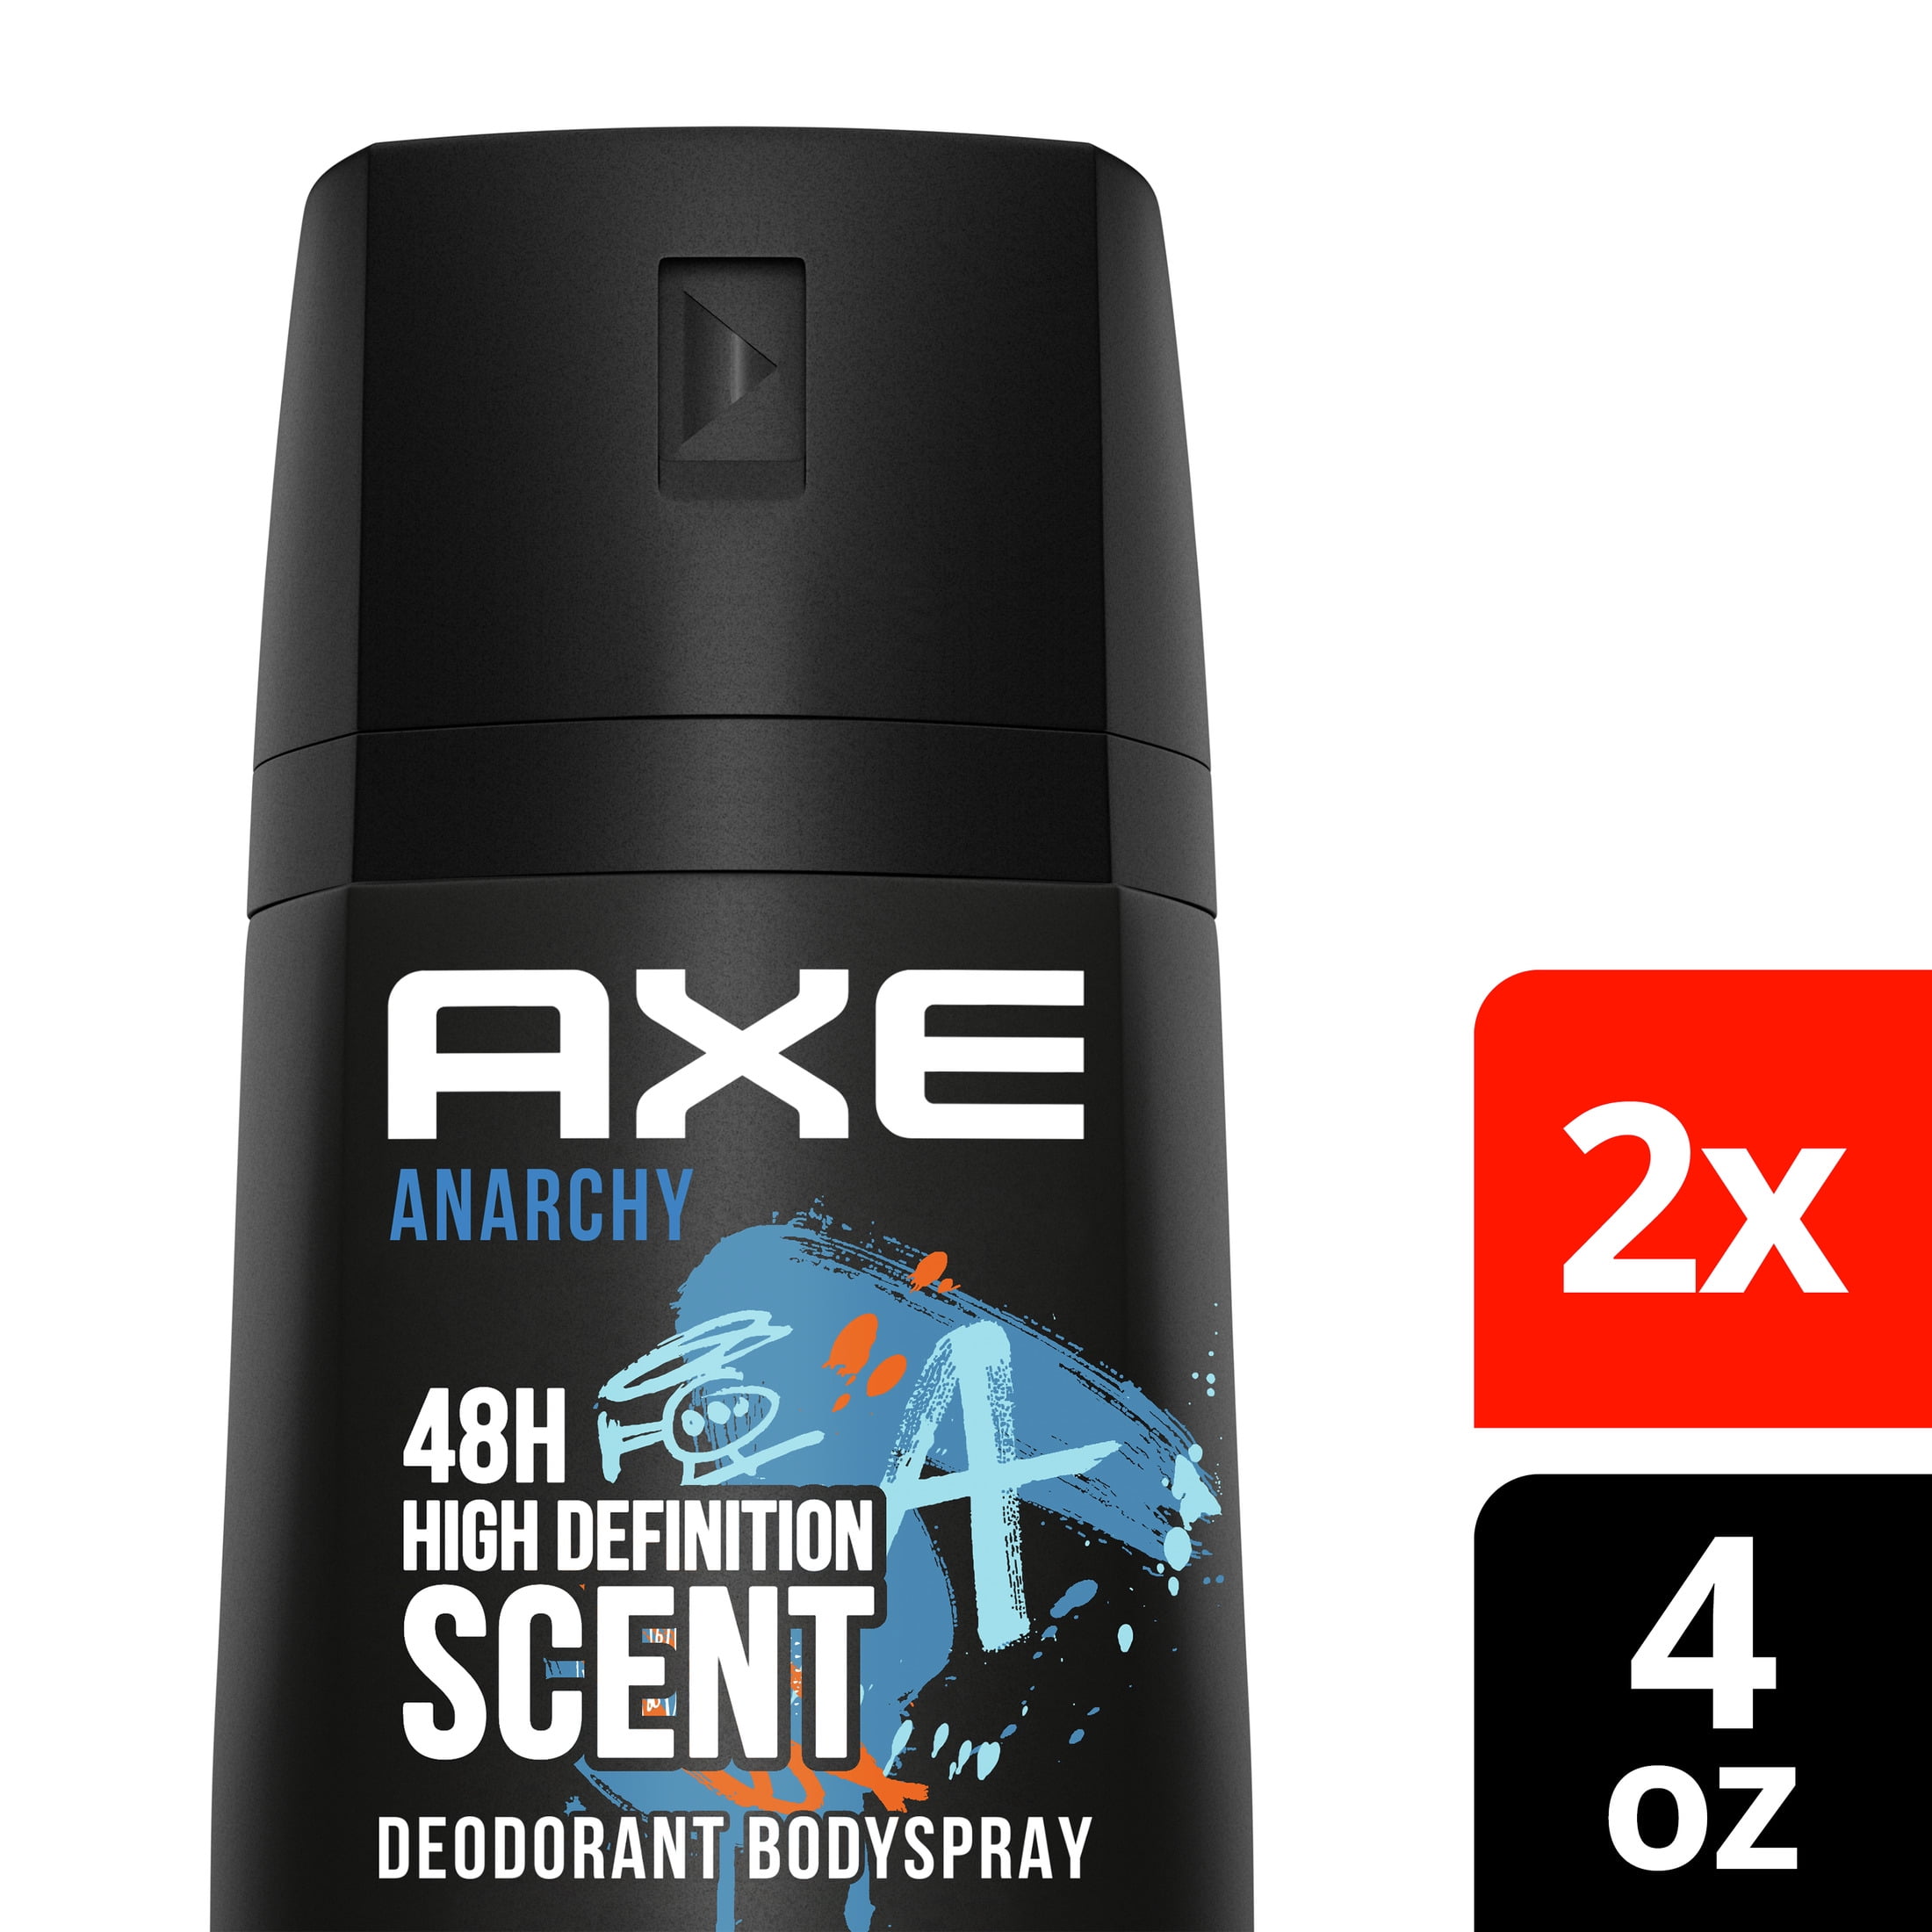 AXE Dual Action Body Spray Anarchy Pomegranate & Sandalwood Mens Deodorant Formulated Without Aluminum Long Lasting Odor Protection oz, Twin Pack -